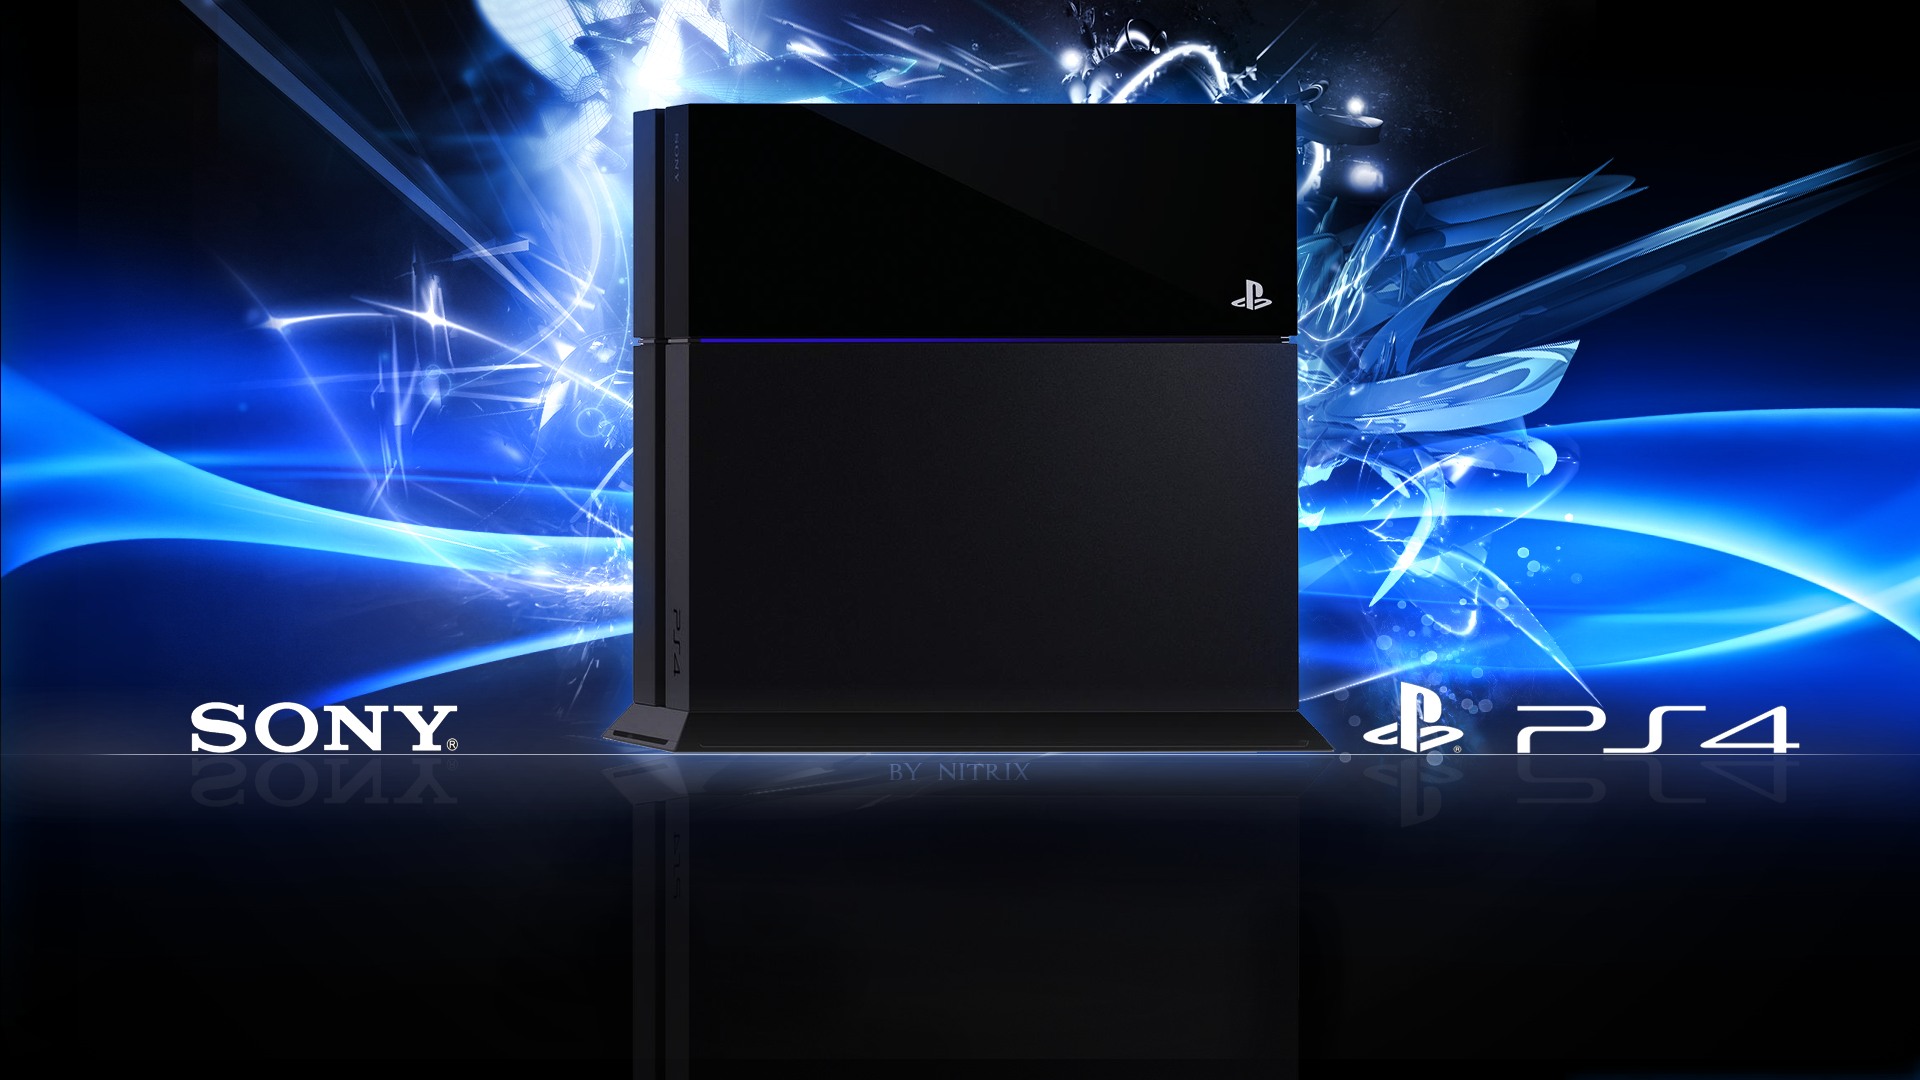 Abstract Ps4 Wallpaper By Nitr1x